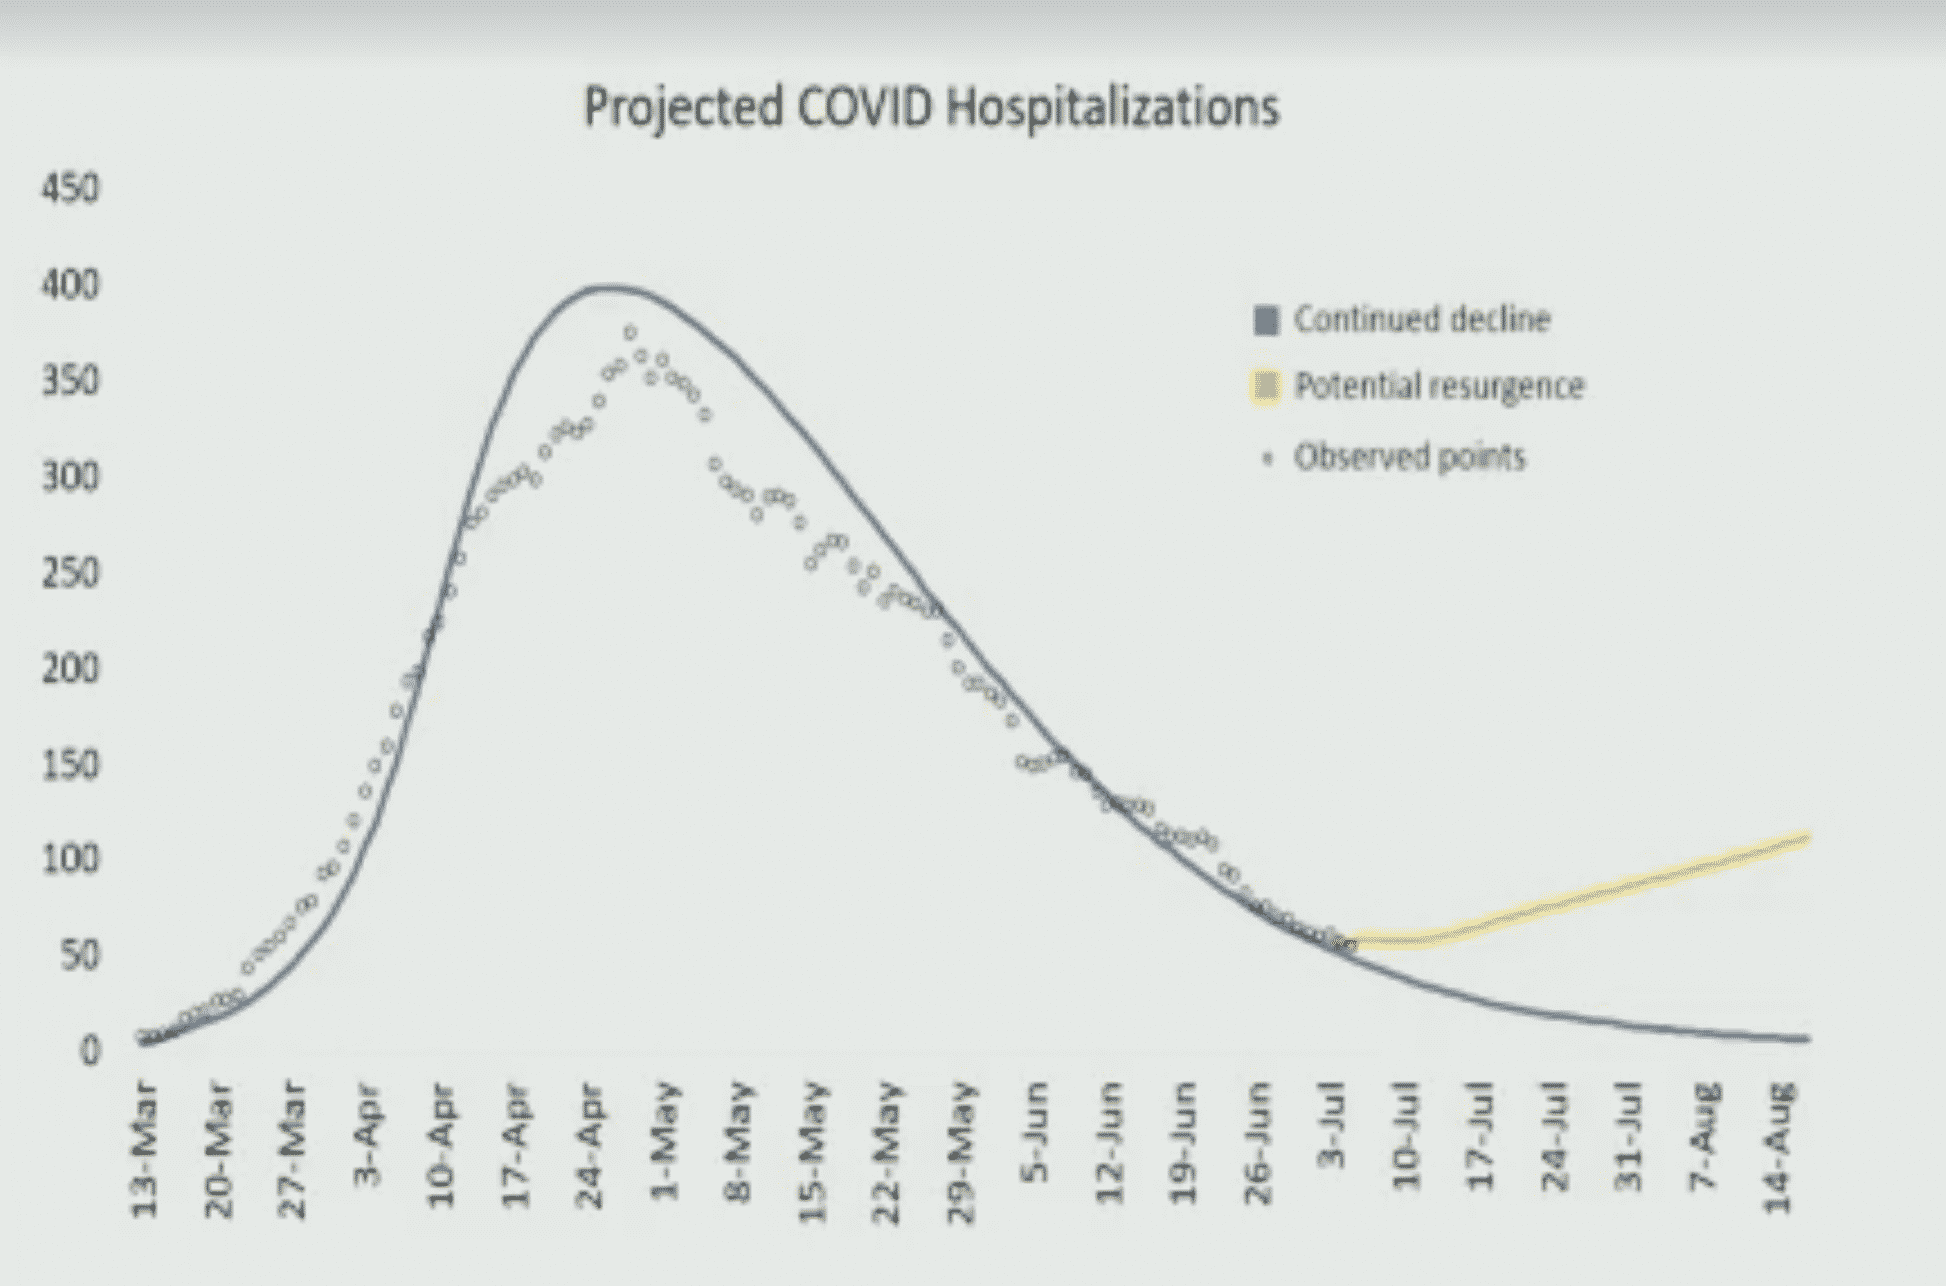 [CREDIT: RIDOH] The RI COVID-19 hospitalization rate is in steady decline. 